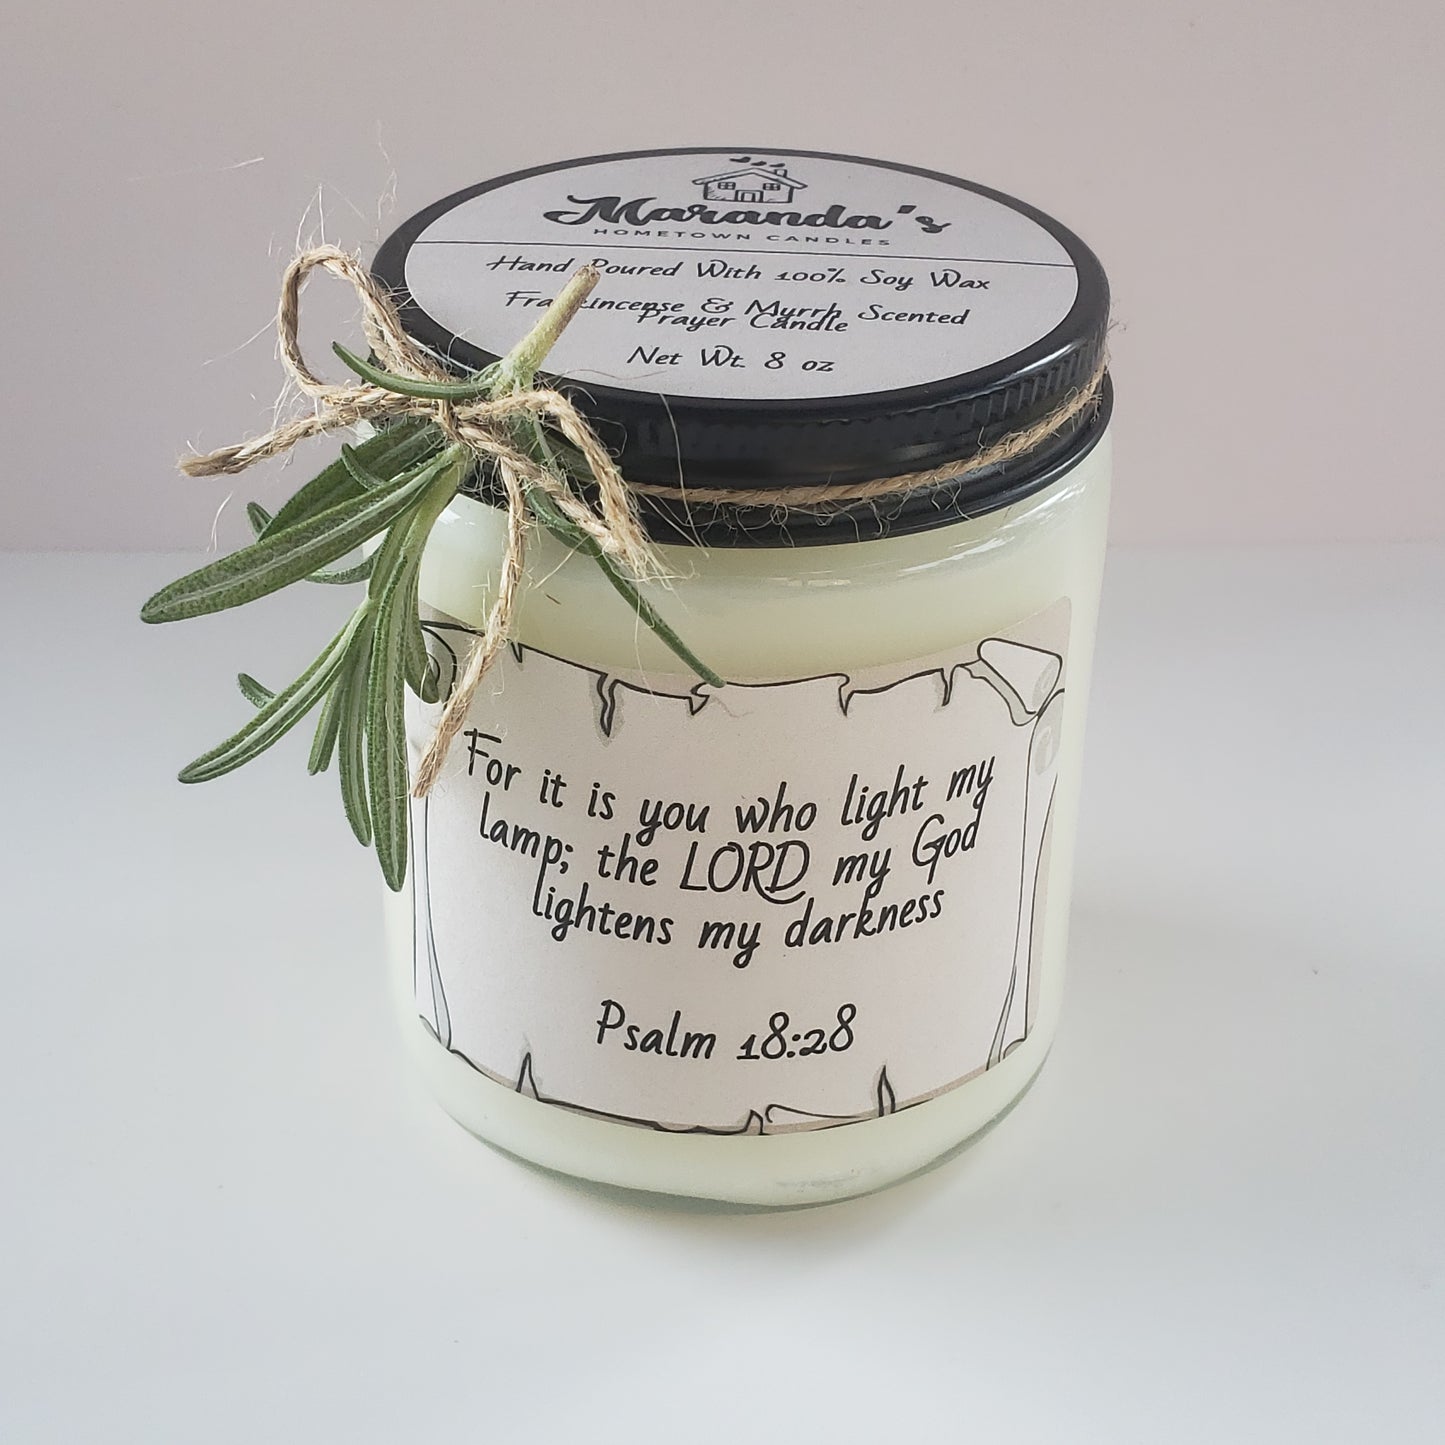 100% Soy Wax Prayer Candles With Scripture